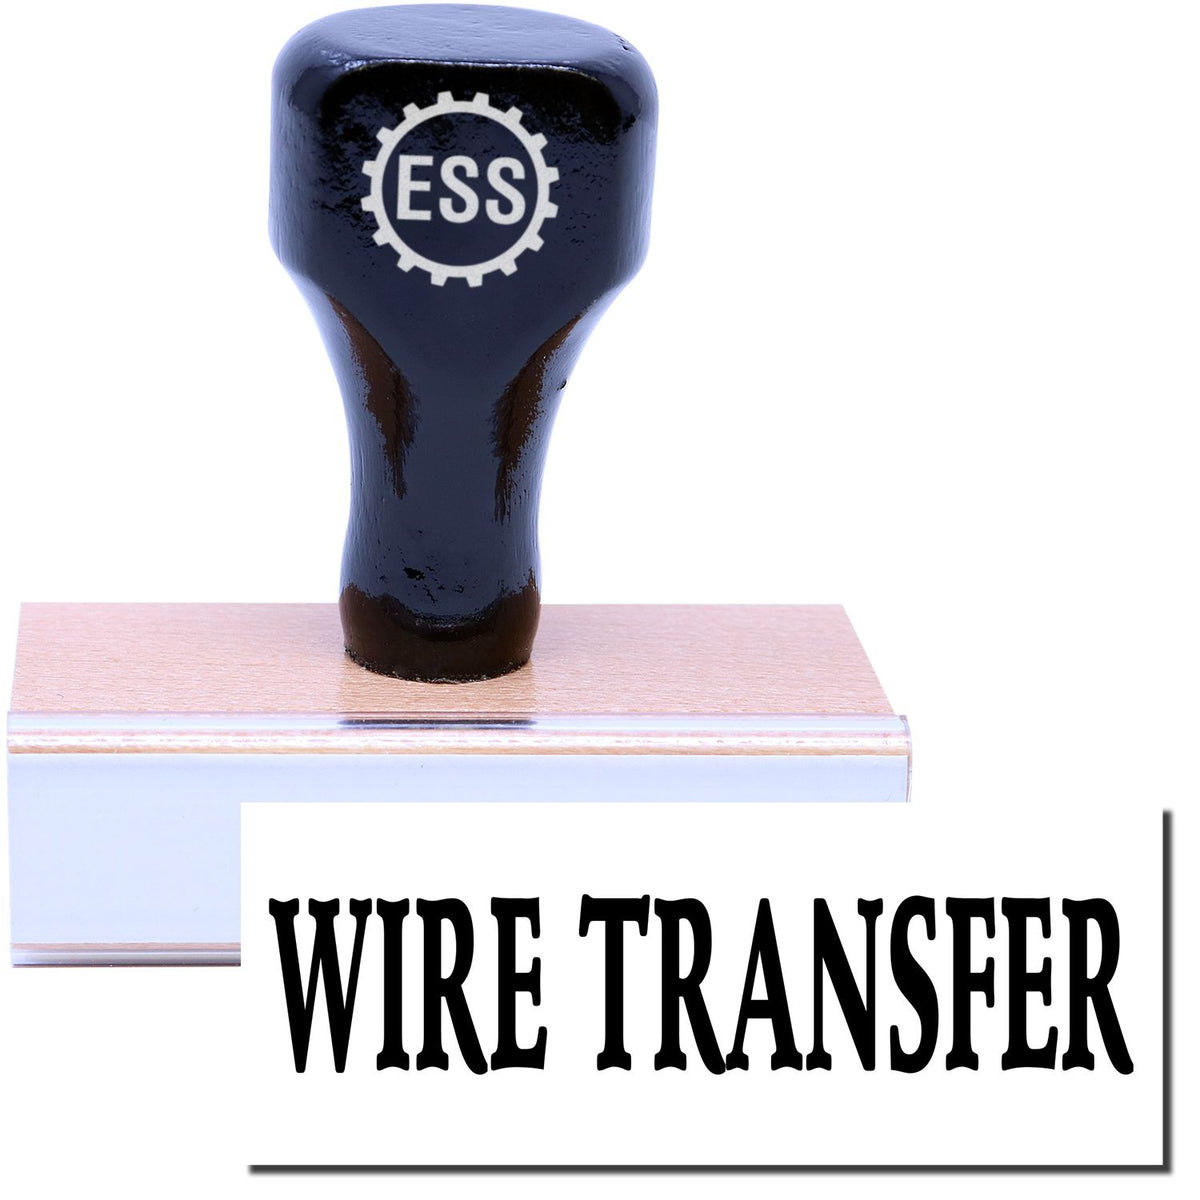 A stock office rubber stamp with a stamped image showing how the text &quot;WIRE TRANSFER&quot; in a large font is displayed after stamping.